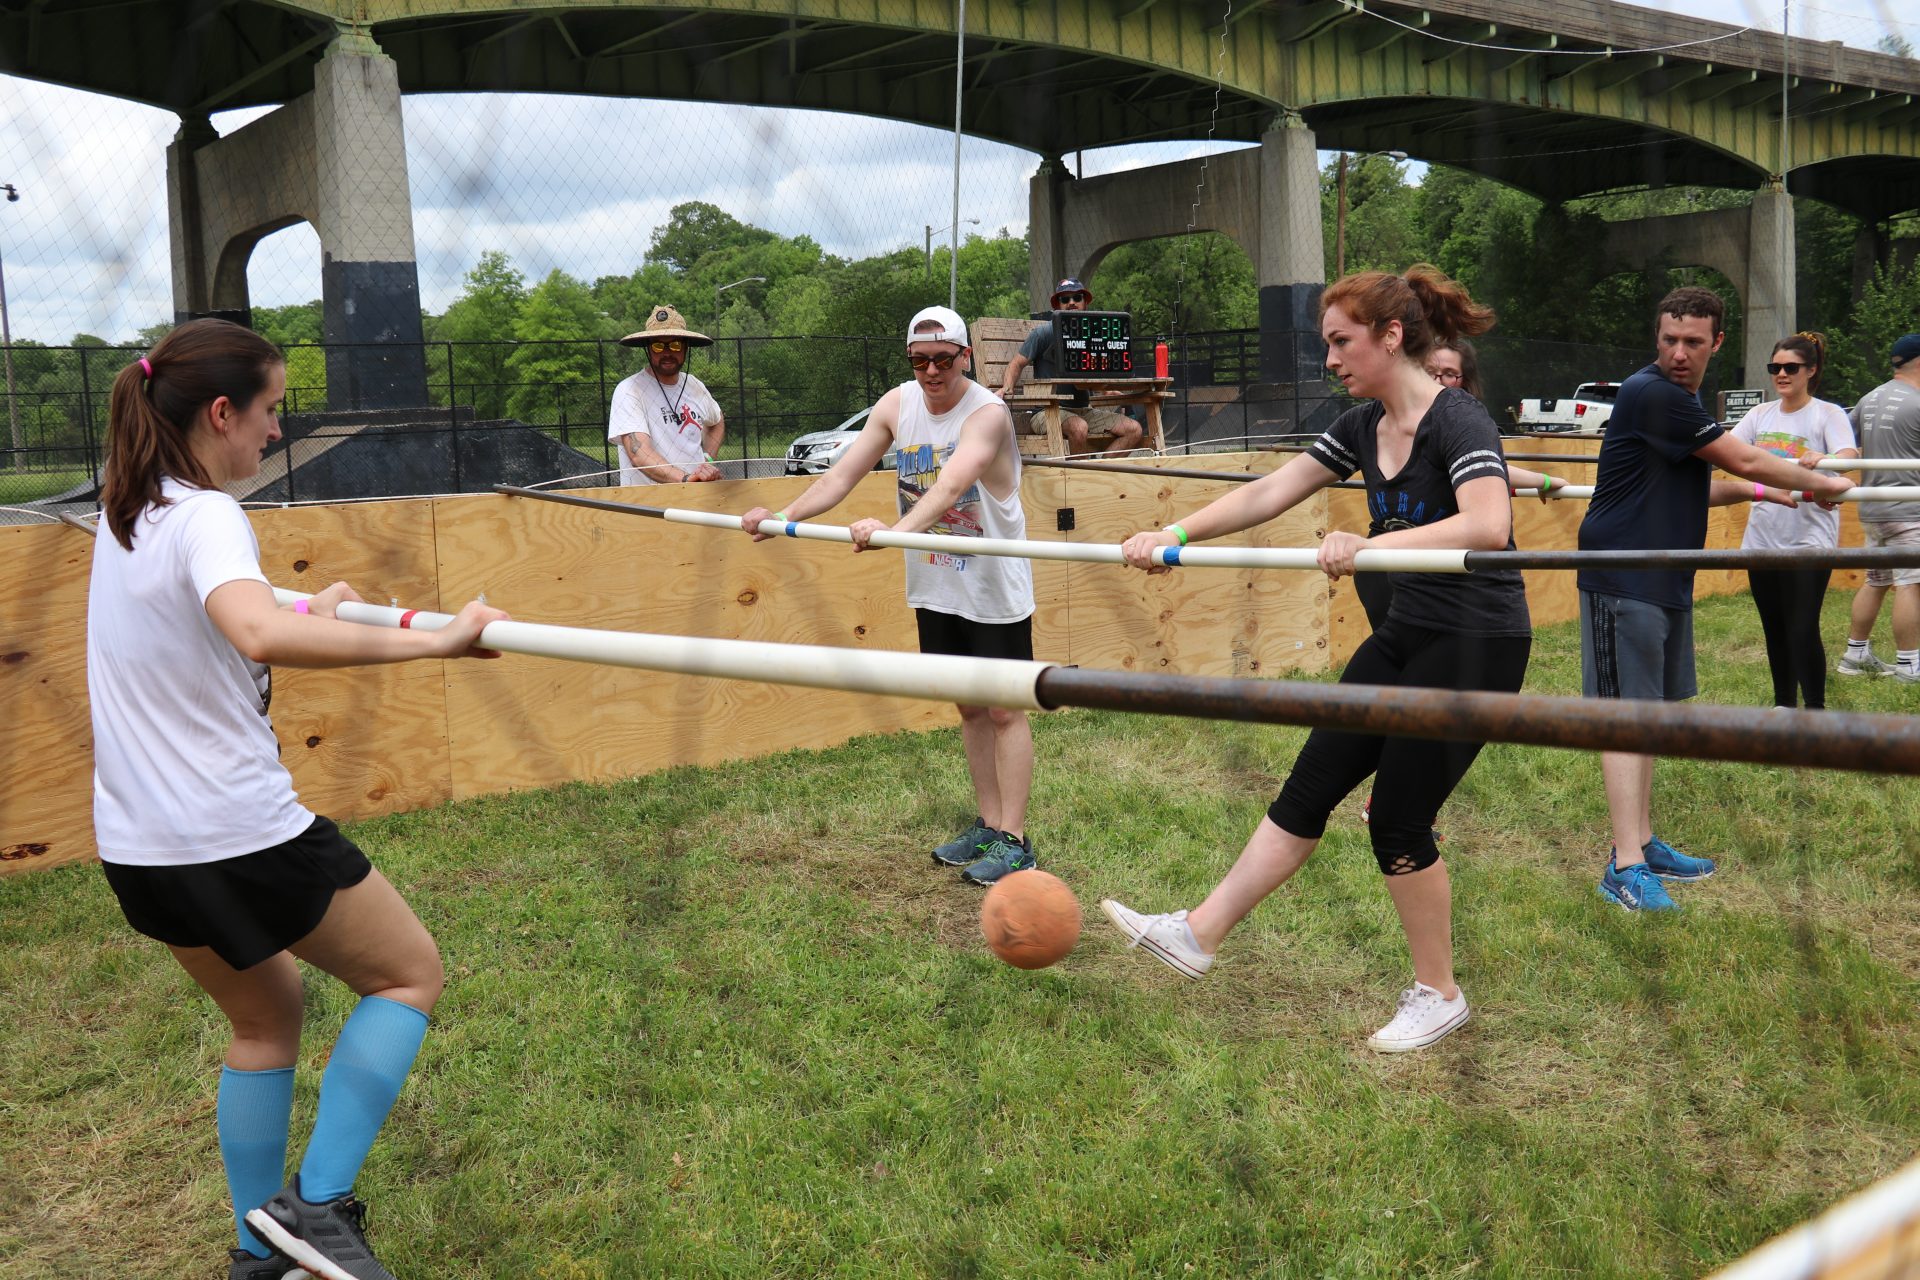 Group playing Human Foosball in the park